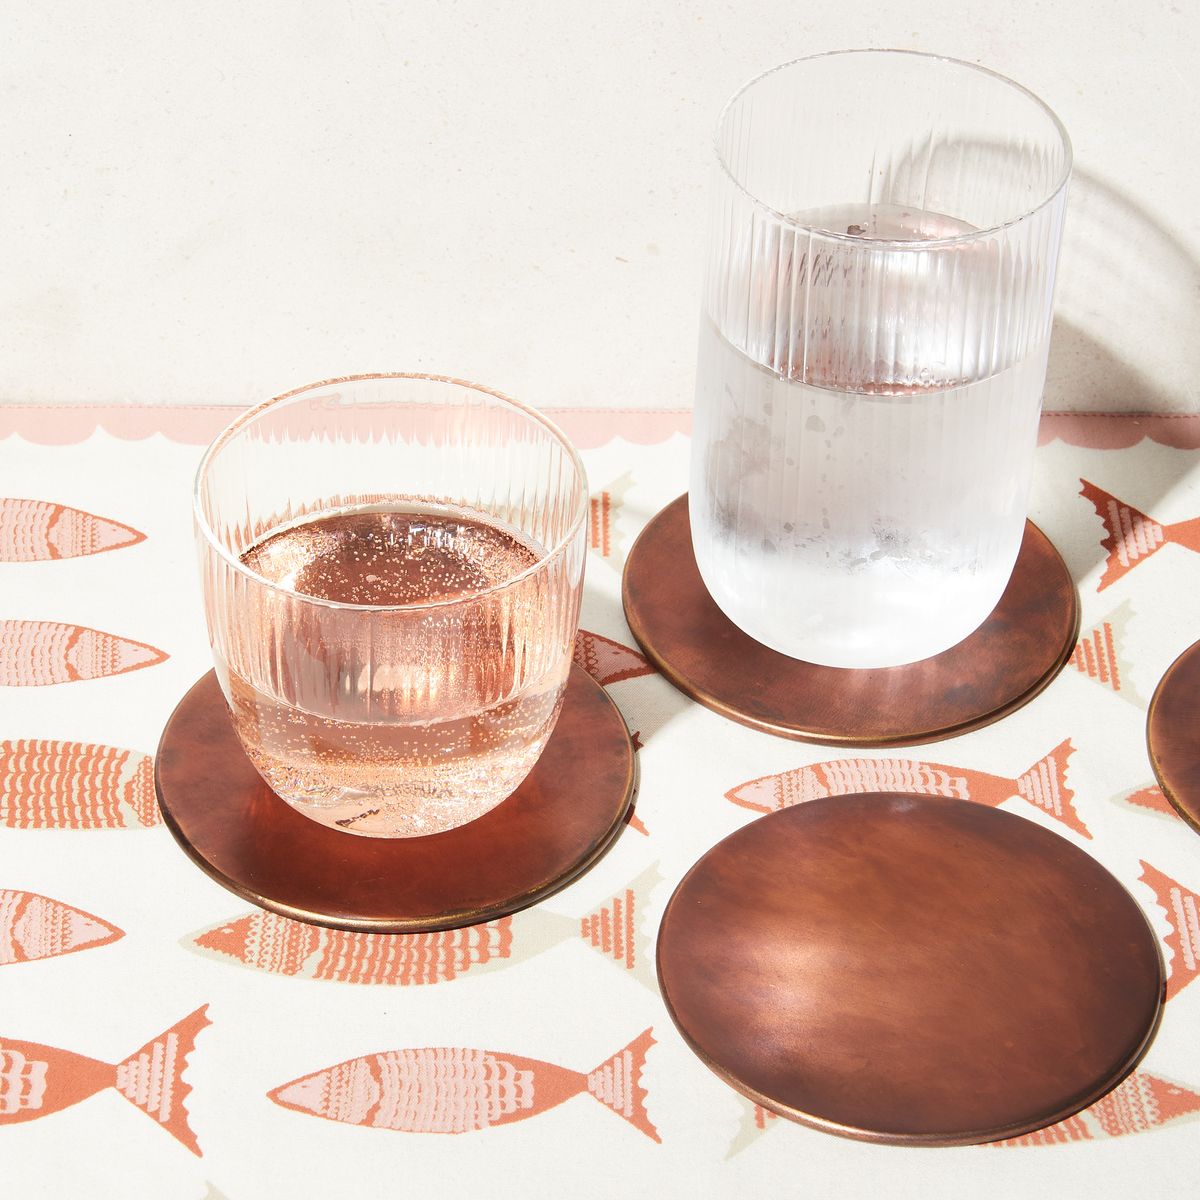 Three copper coaster, one with a short glass, one with a tall glass, on top of a placemat with a fish design